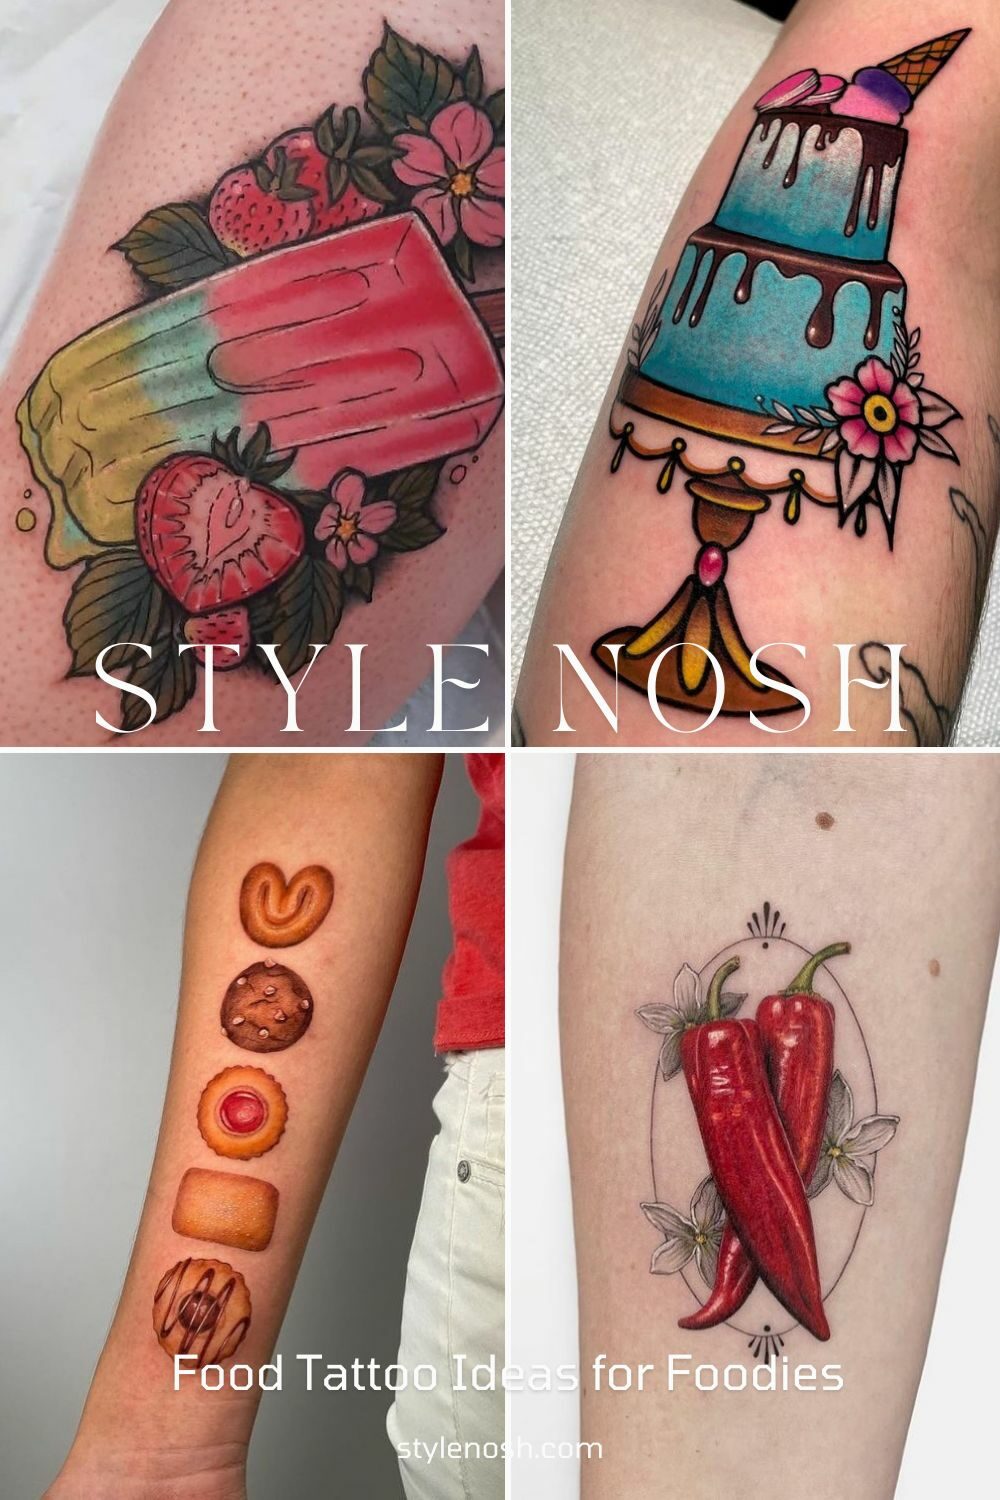 Stunning food tattoos idea Irrespective of what other people say its wonderful to be able to express yourself via something you love